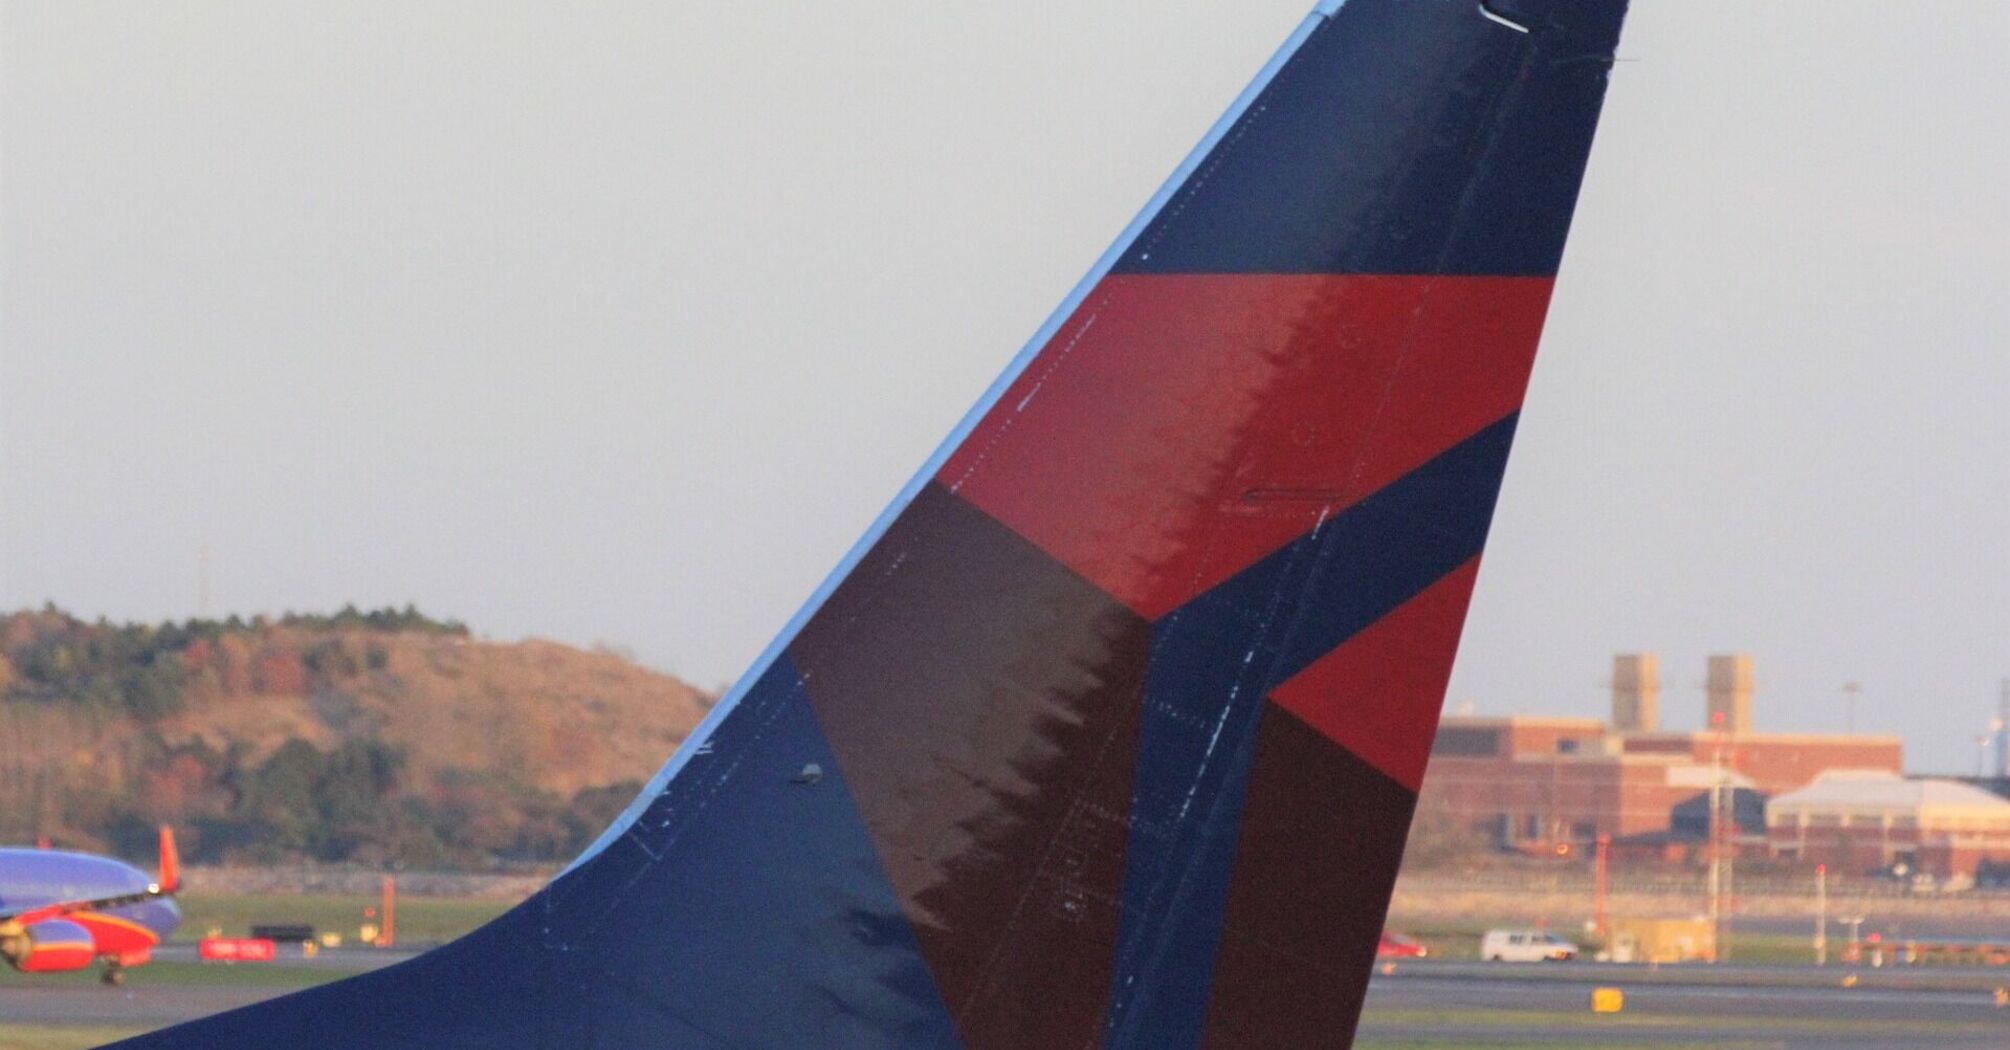 Delta Airlines tail fin on tarmac at dusk